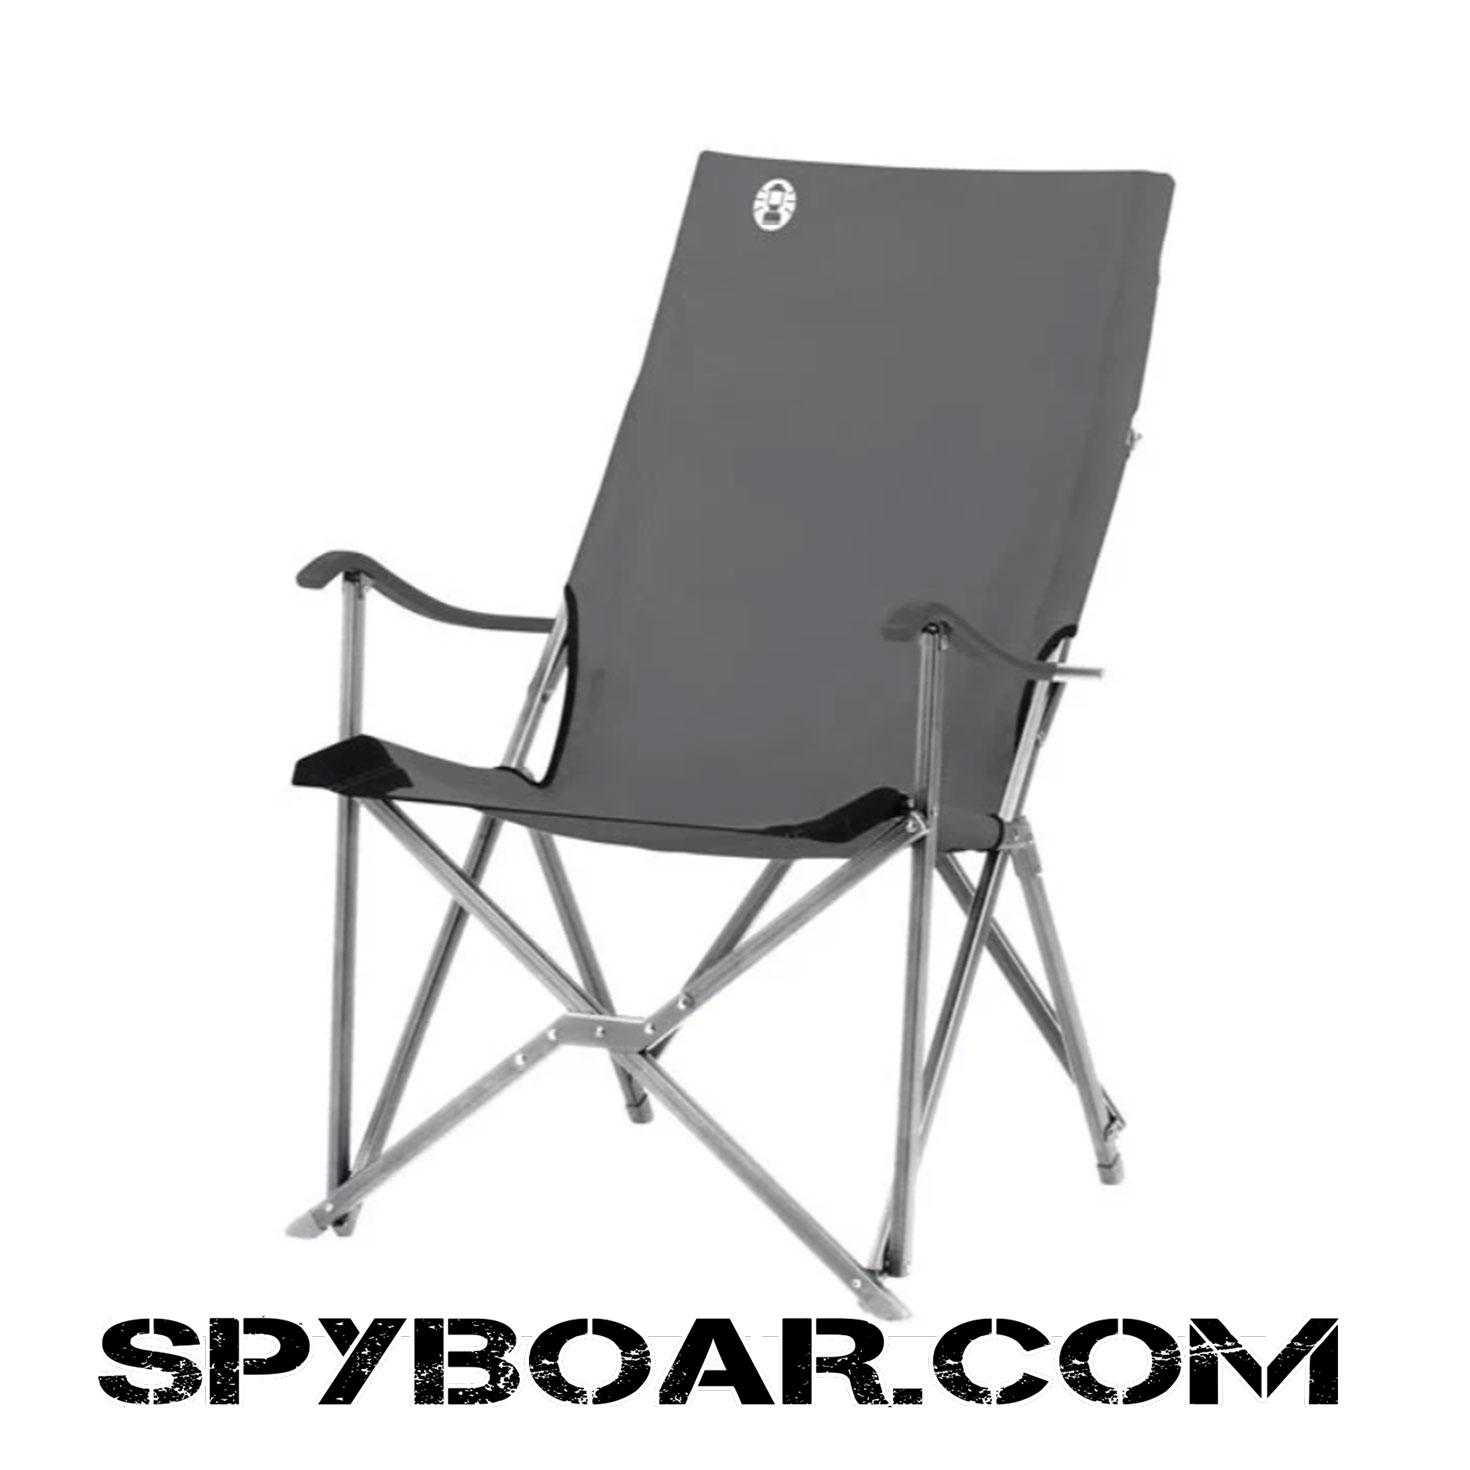 Aluminum folding camping chair by Coleman